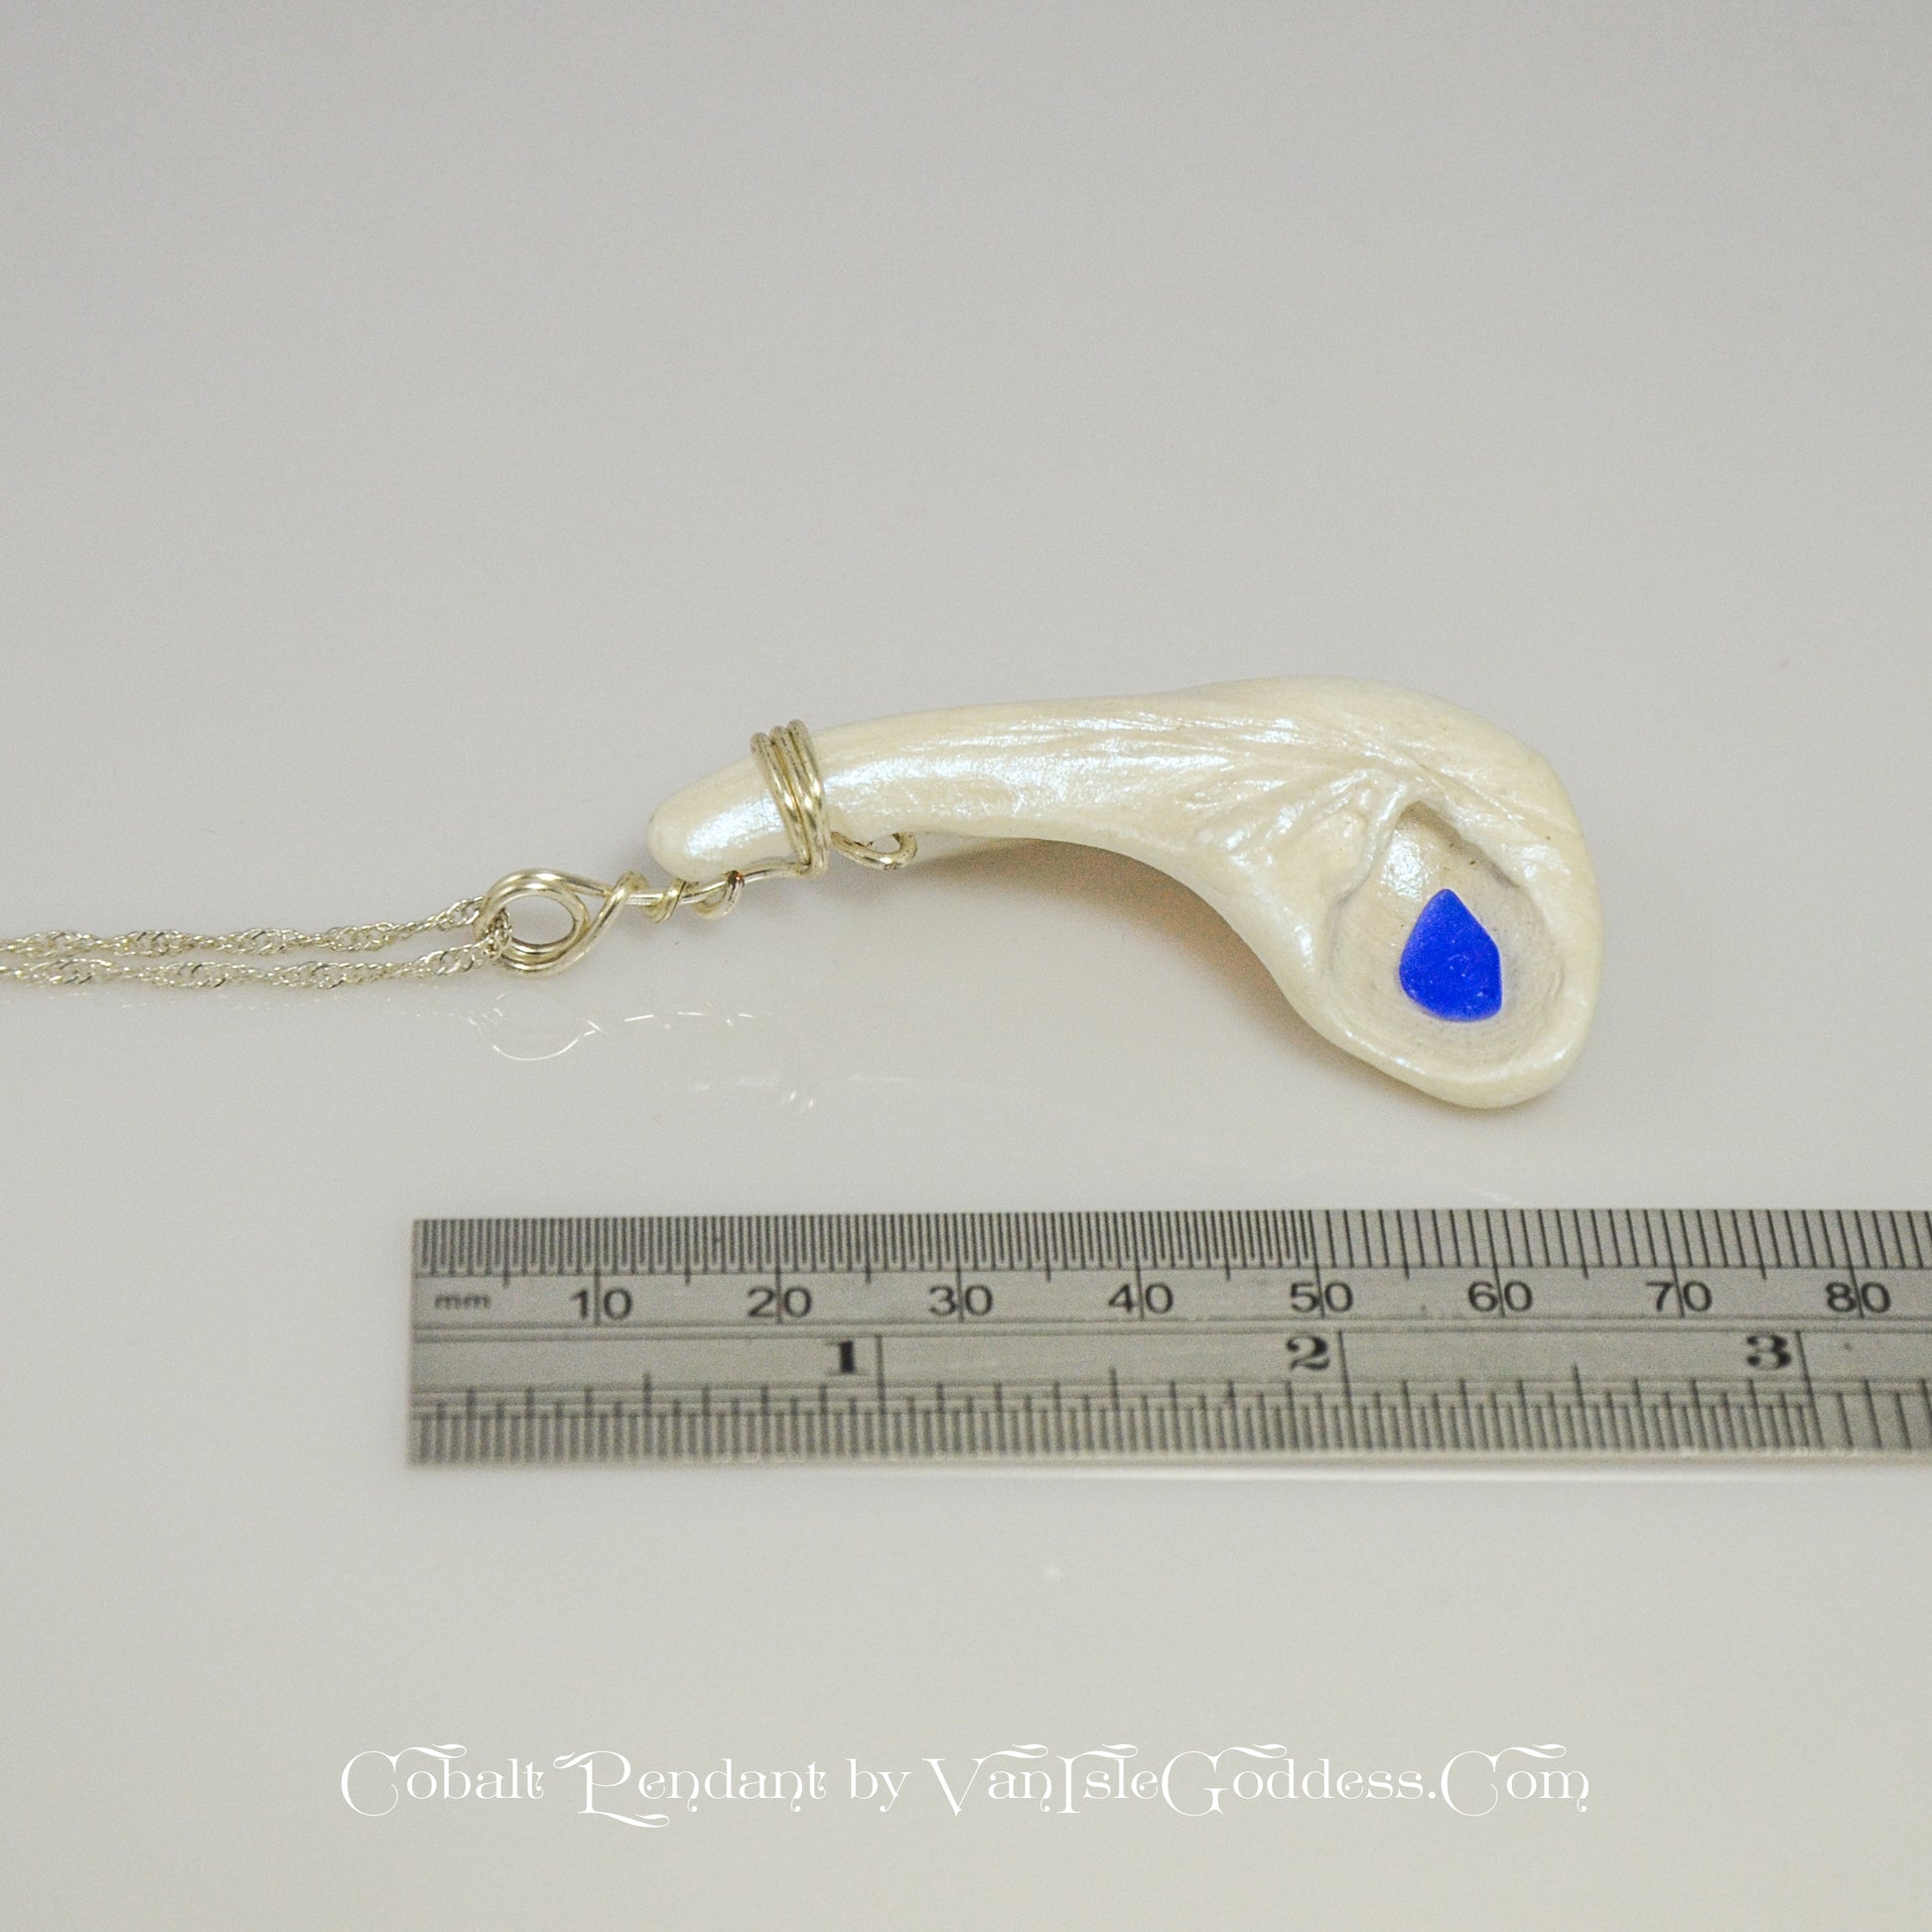 The cobalt pendant is shown on its side along a ruler so the viewer can see the length of the pendant.